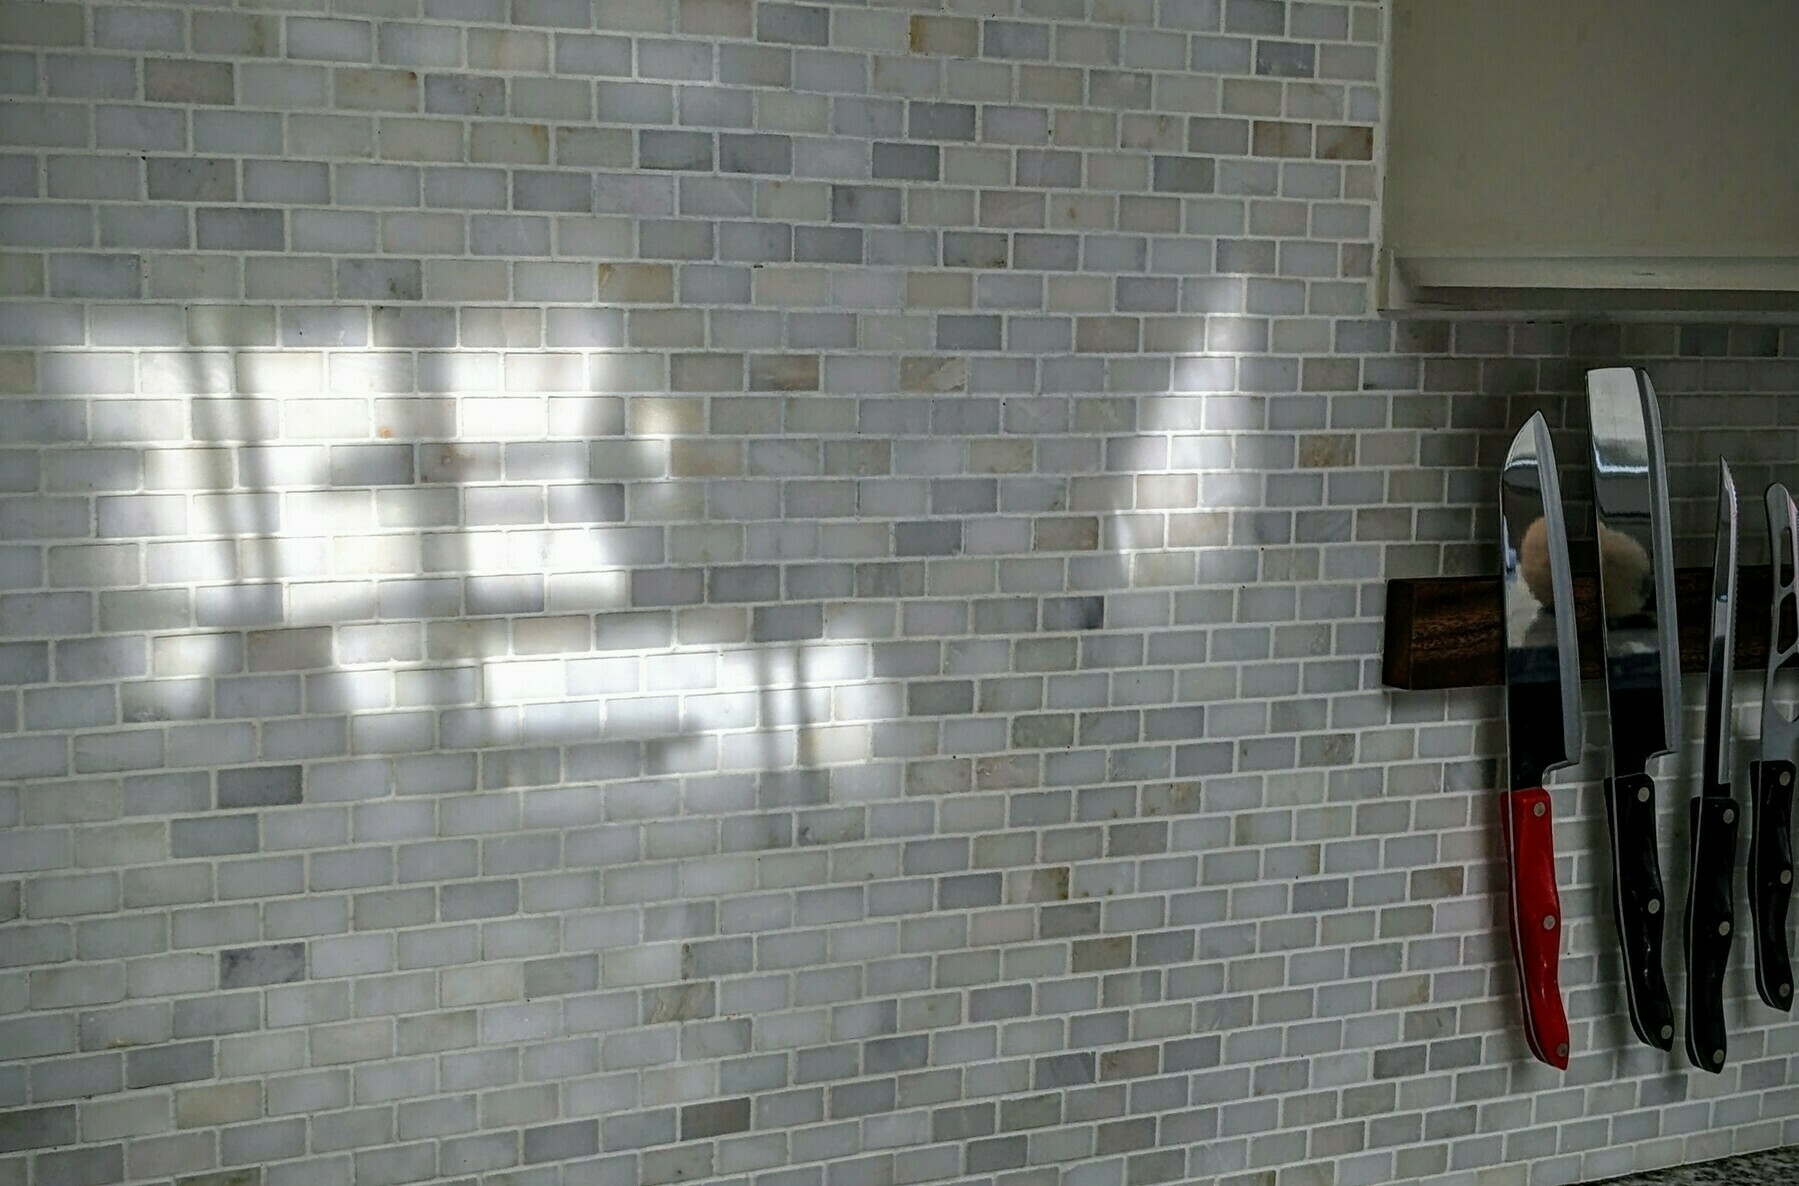 Tiled kitchen backsplash with interesting indeterminate shadows and a magnetic knife rack on the right, with cleavers and knives, including a red-handled cleaver, which is the only strong color in a mostly black, white, and gray image